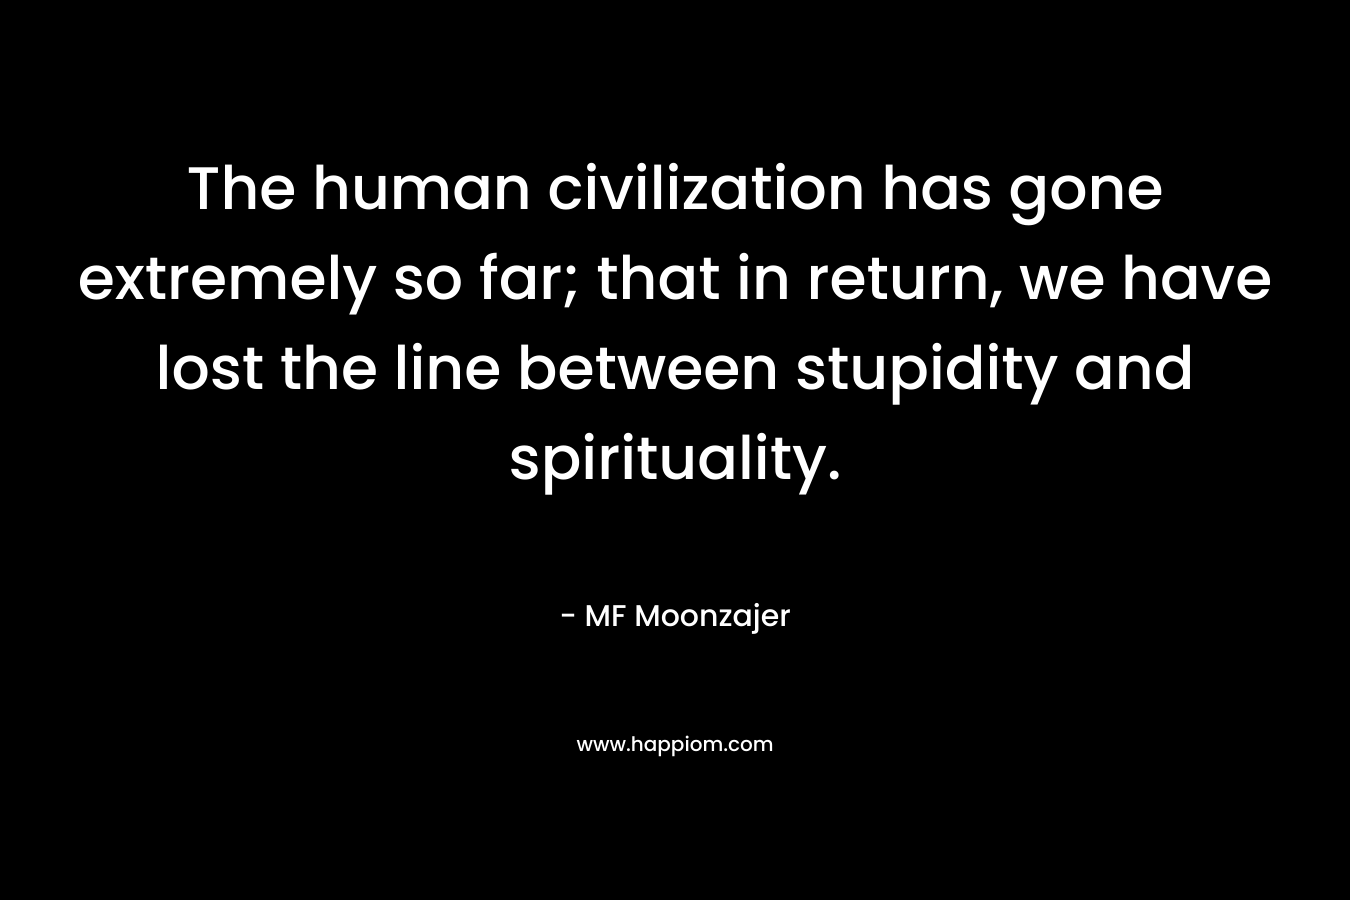 The human civilization has gone extremely so far; that in return, we have lost the line between stupidity and spirituality. – MF Moonzajer